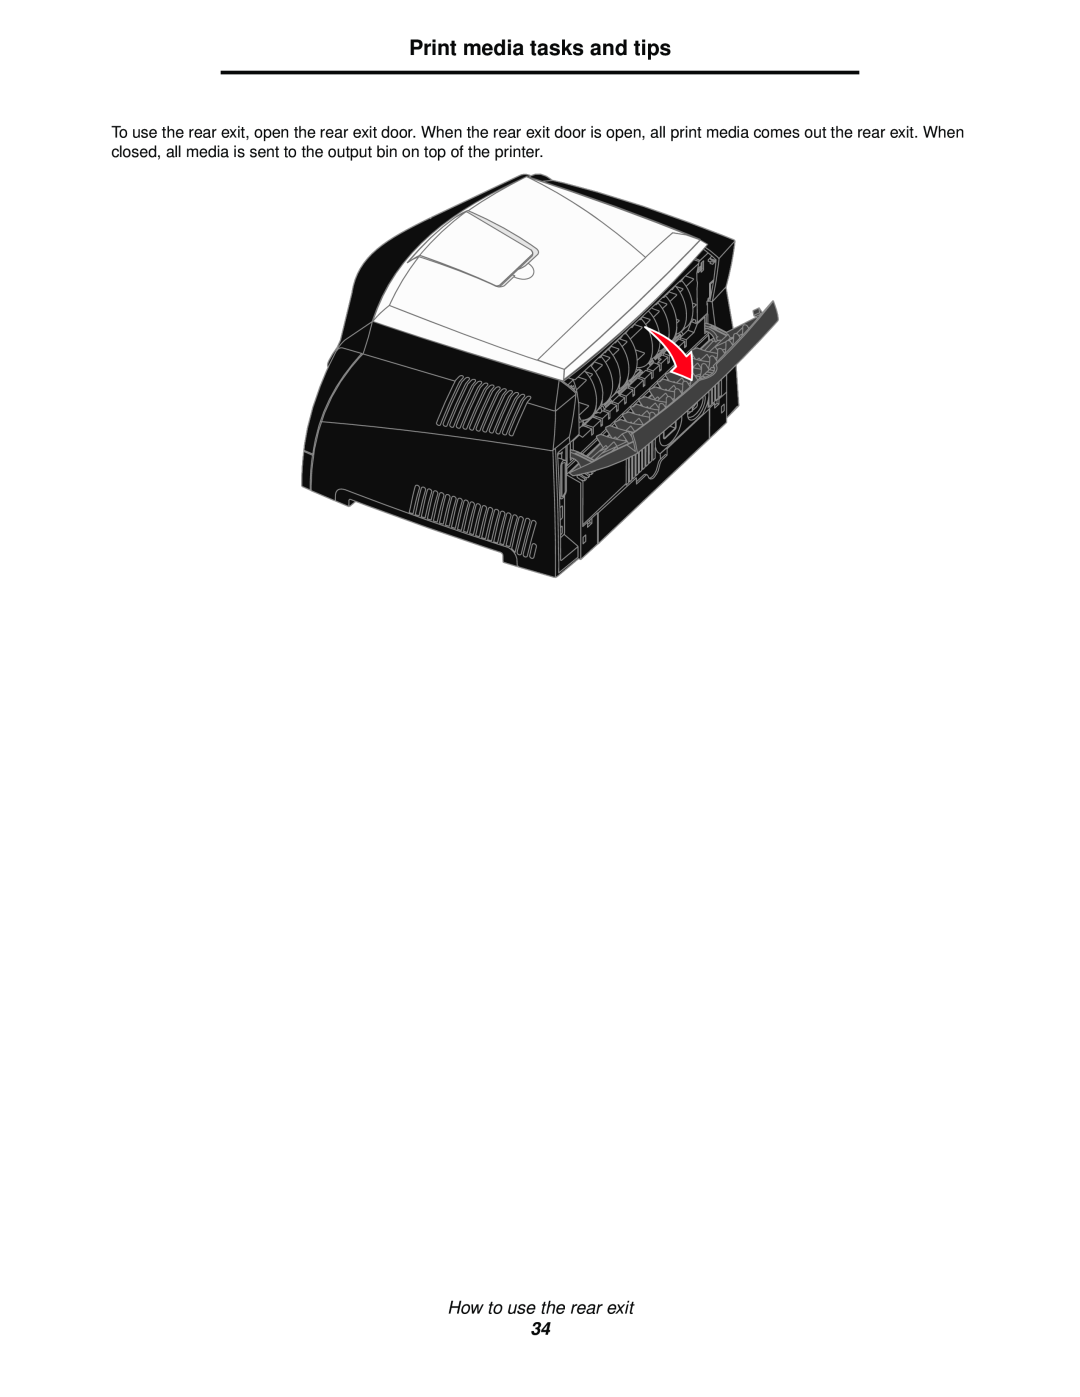 Lexmark 342n, 340 manual Print media tasks and tips, How to use the rear exit 